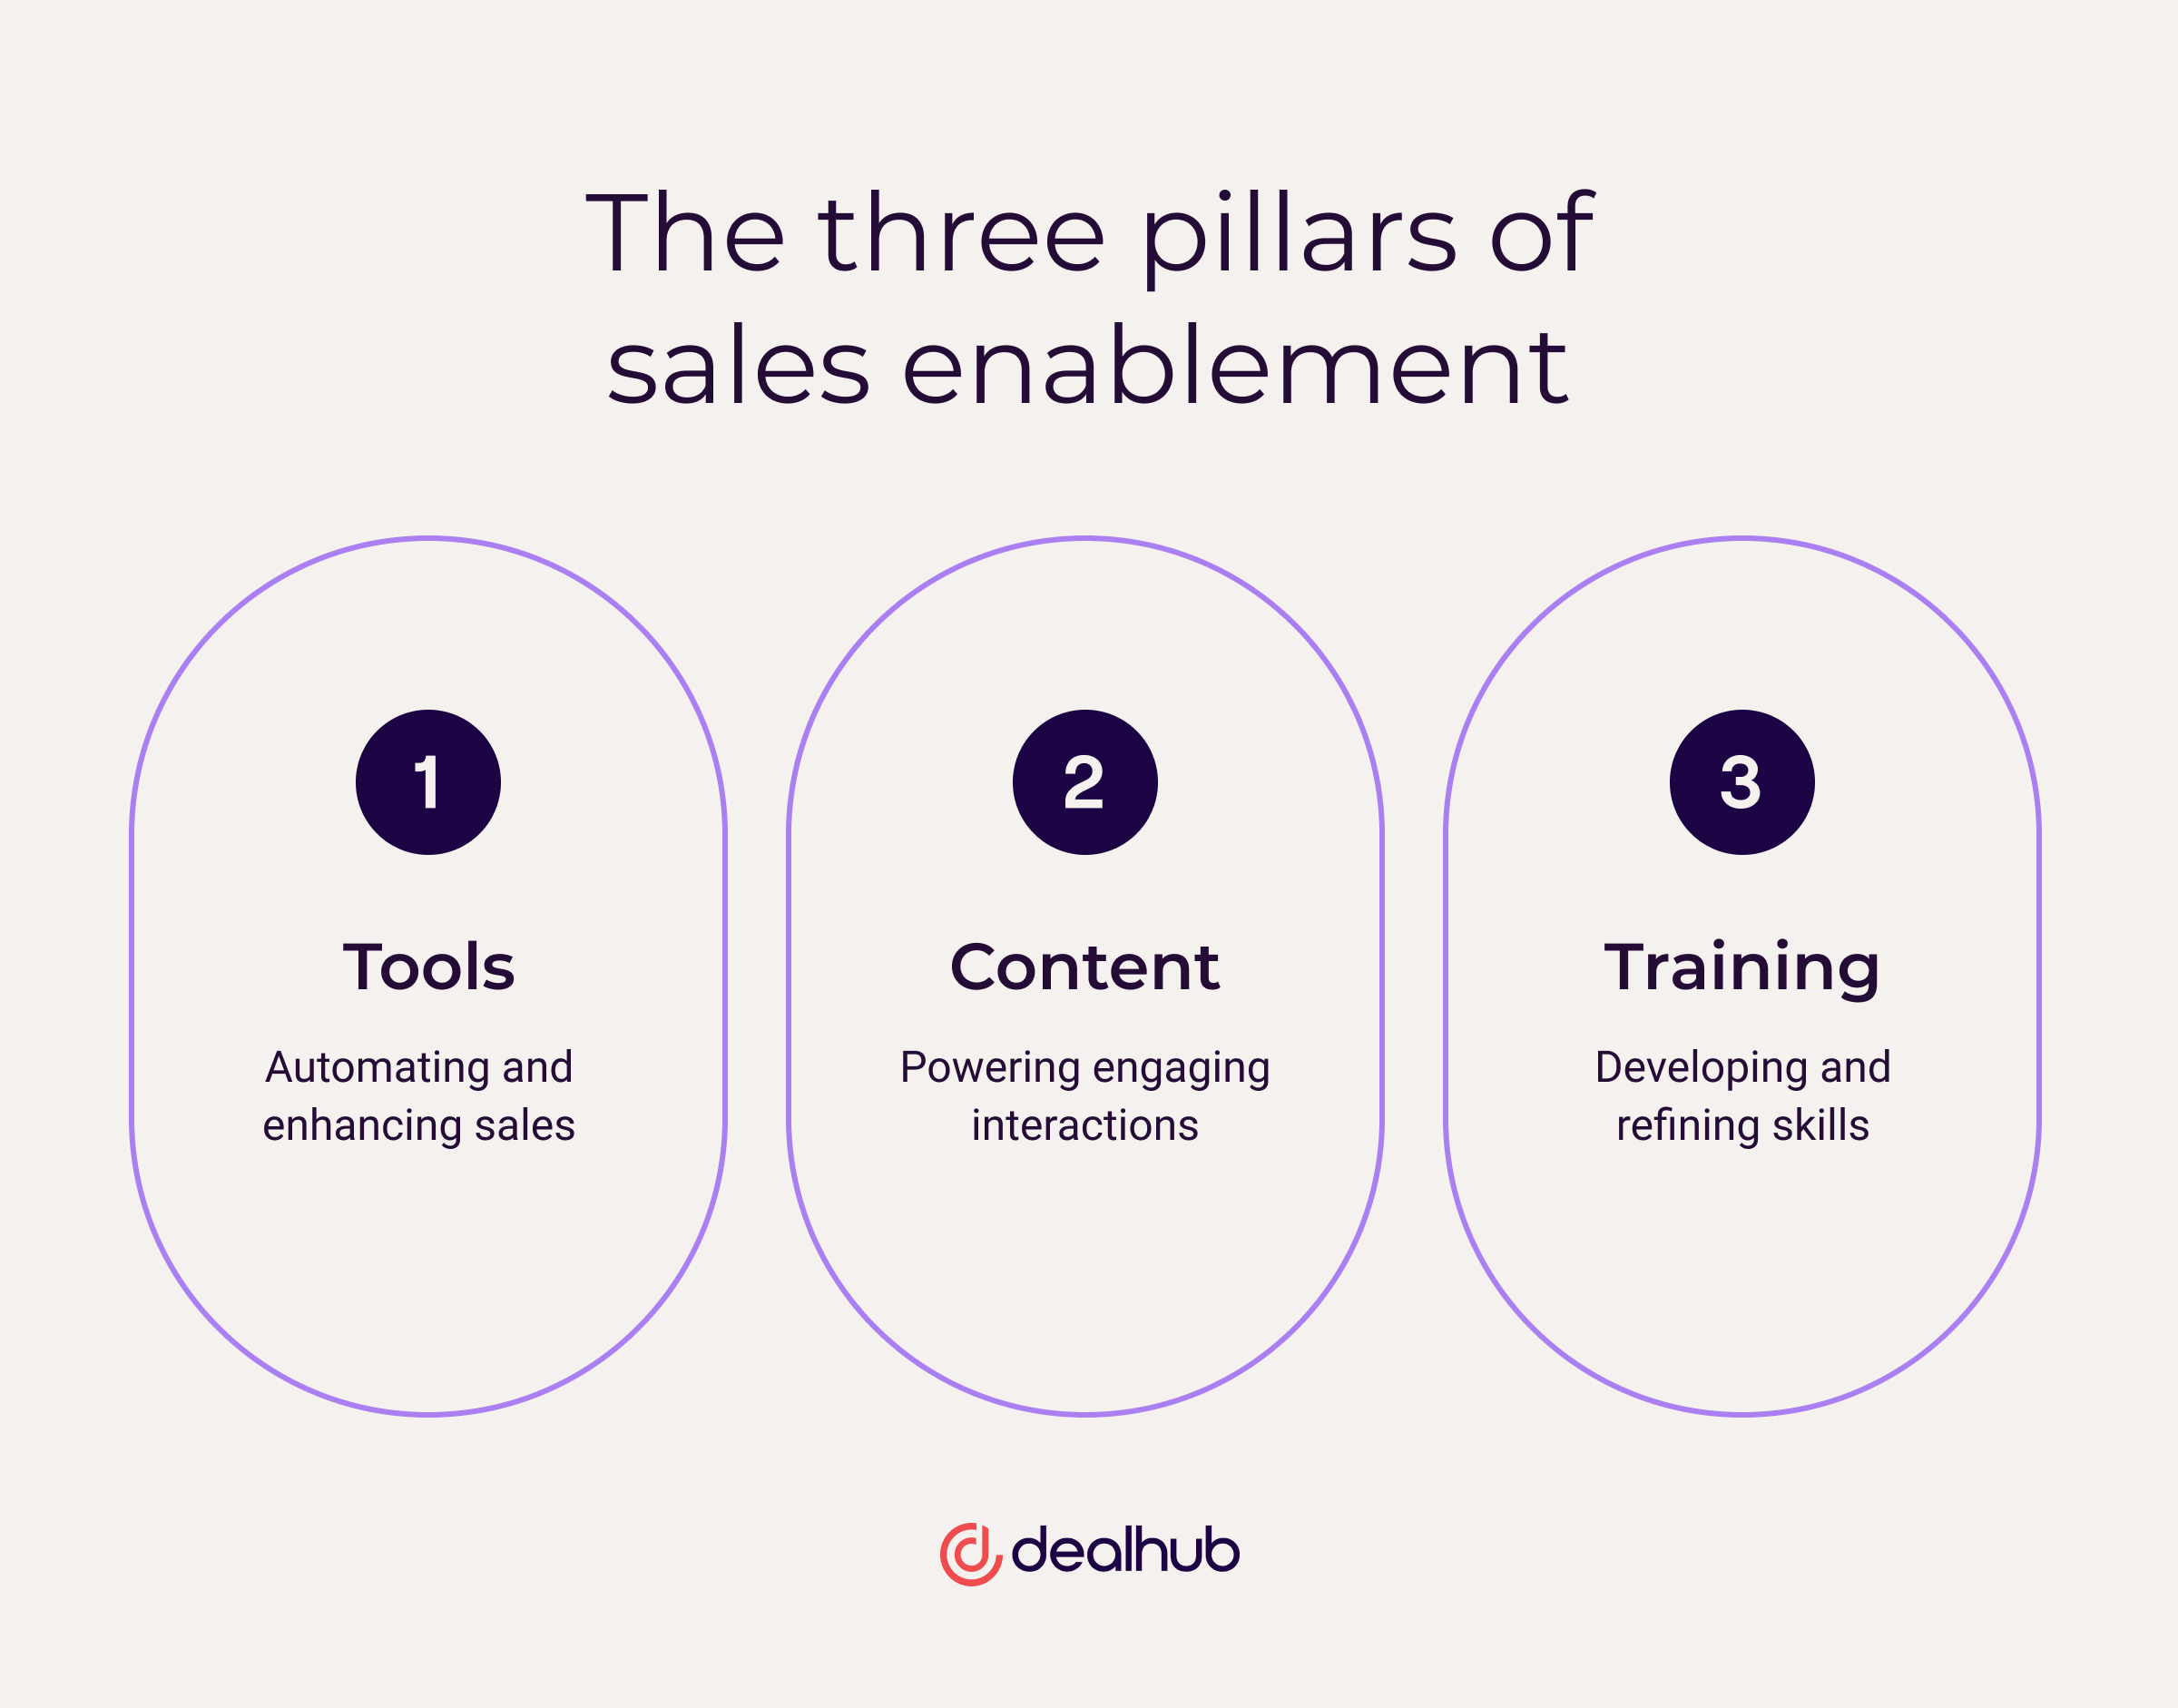 The three pillars of sales enablement